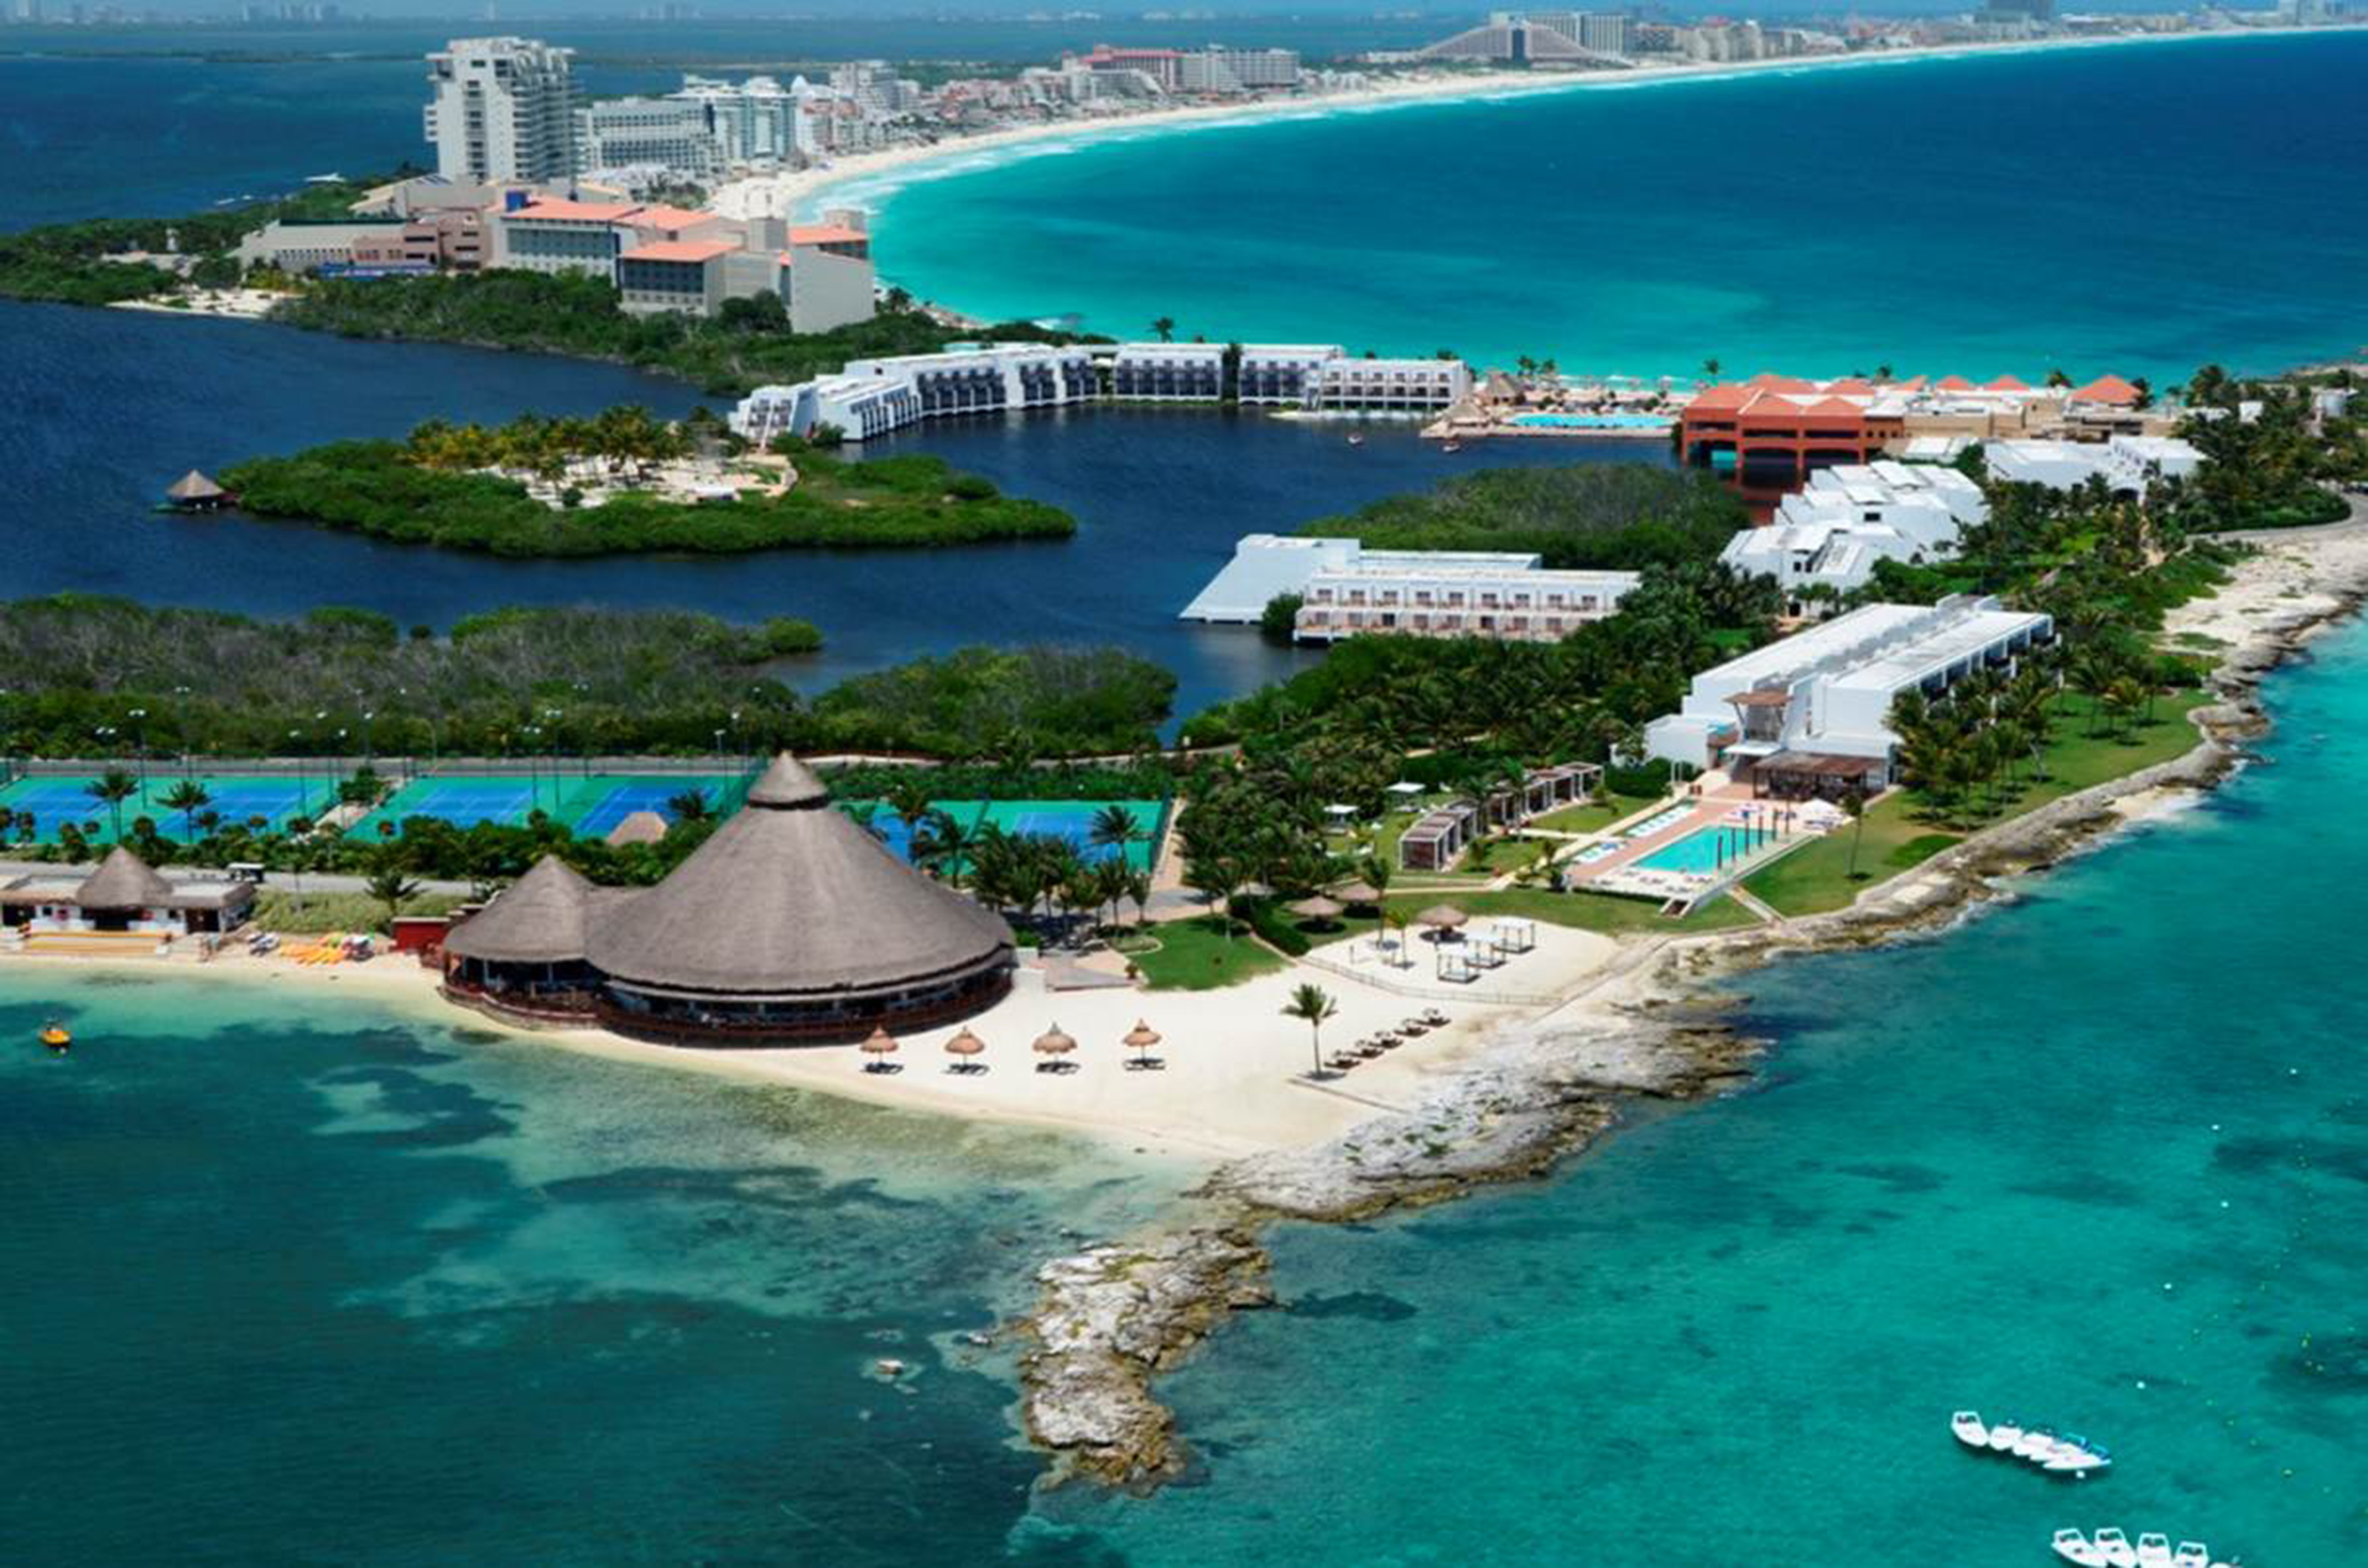 Club Med Cancun | Best Family-Friendly All-Inclusive Resort in Cancun Mexico | Aerial